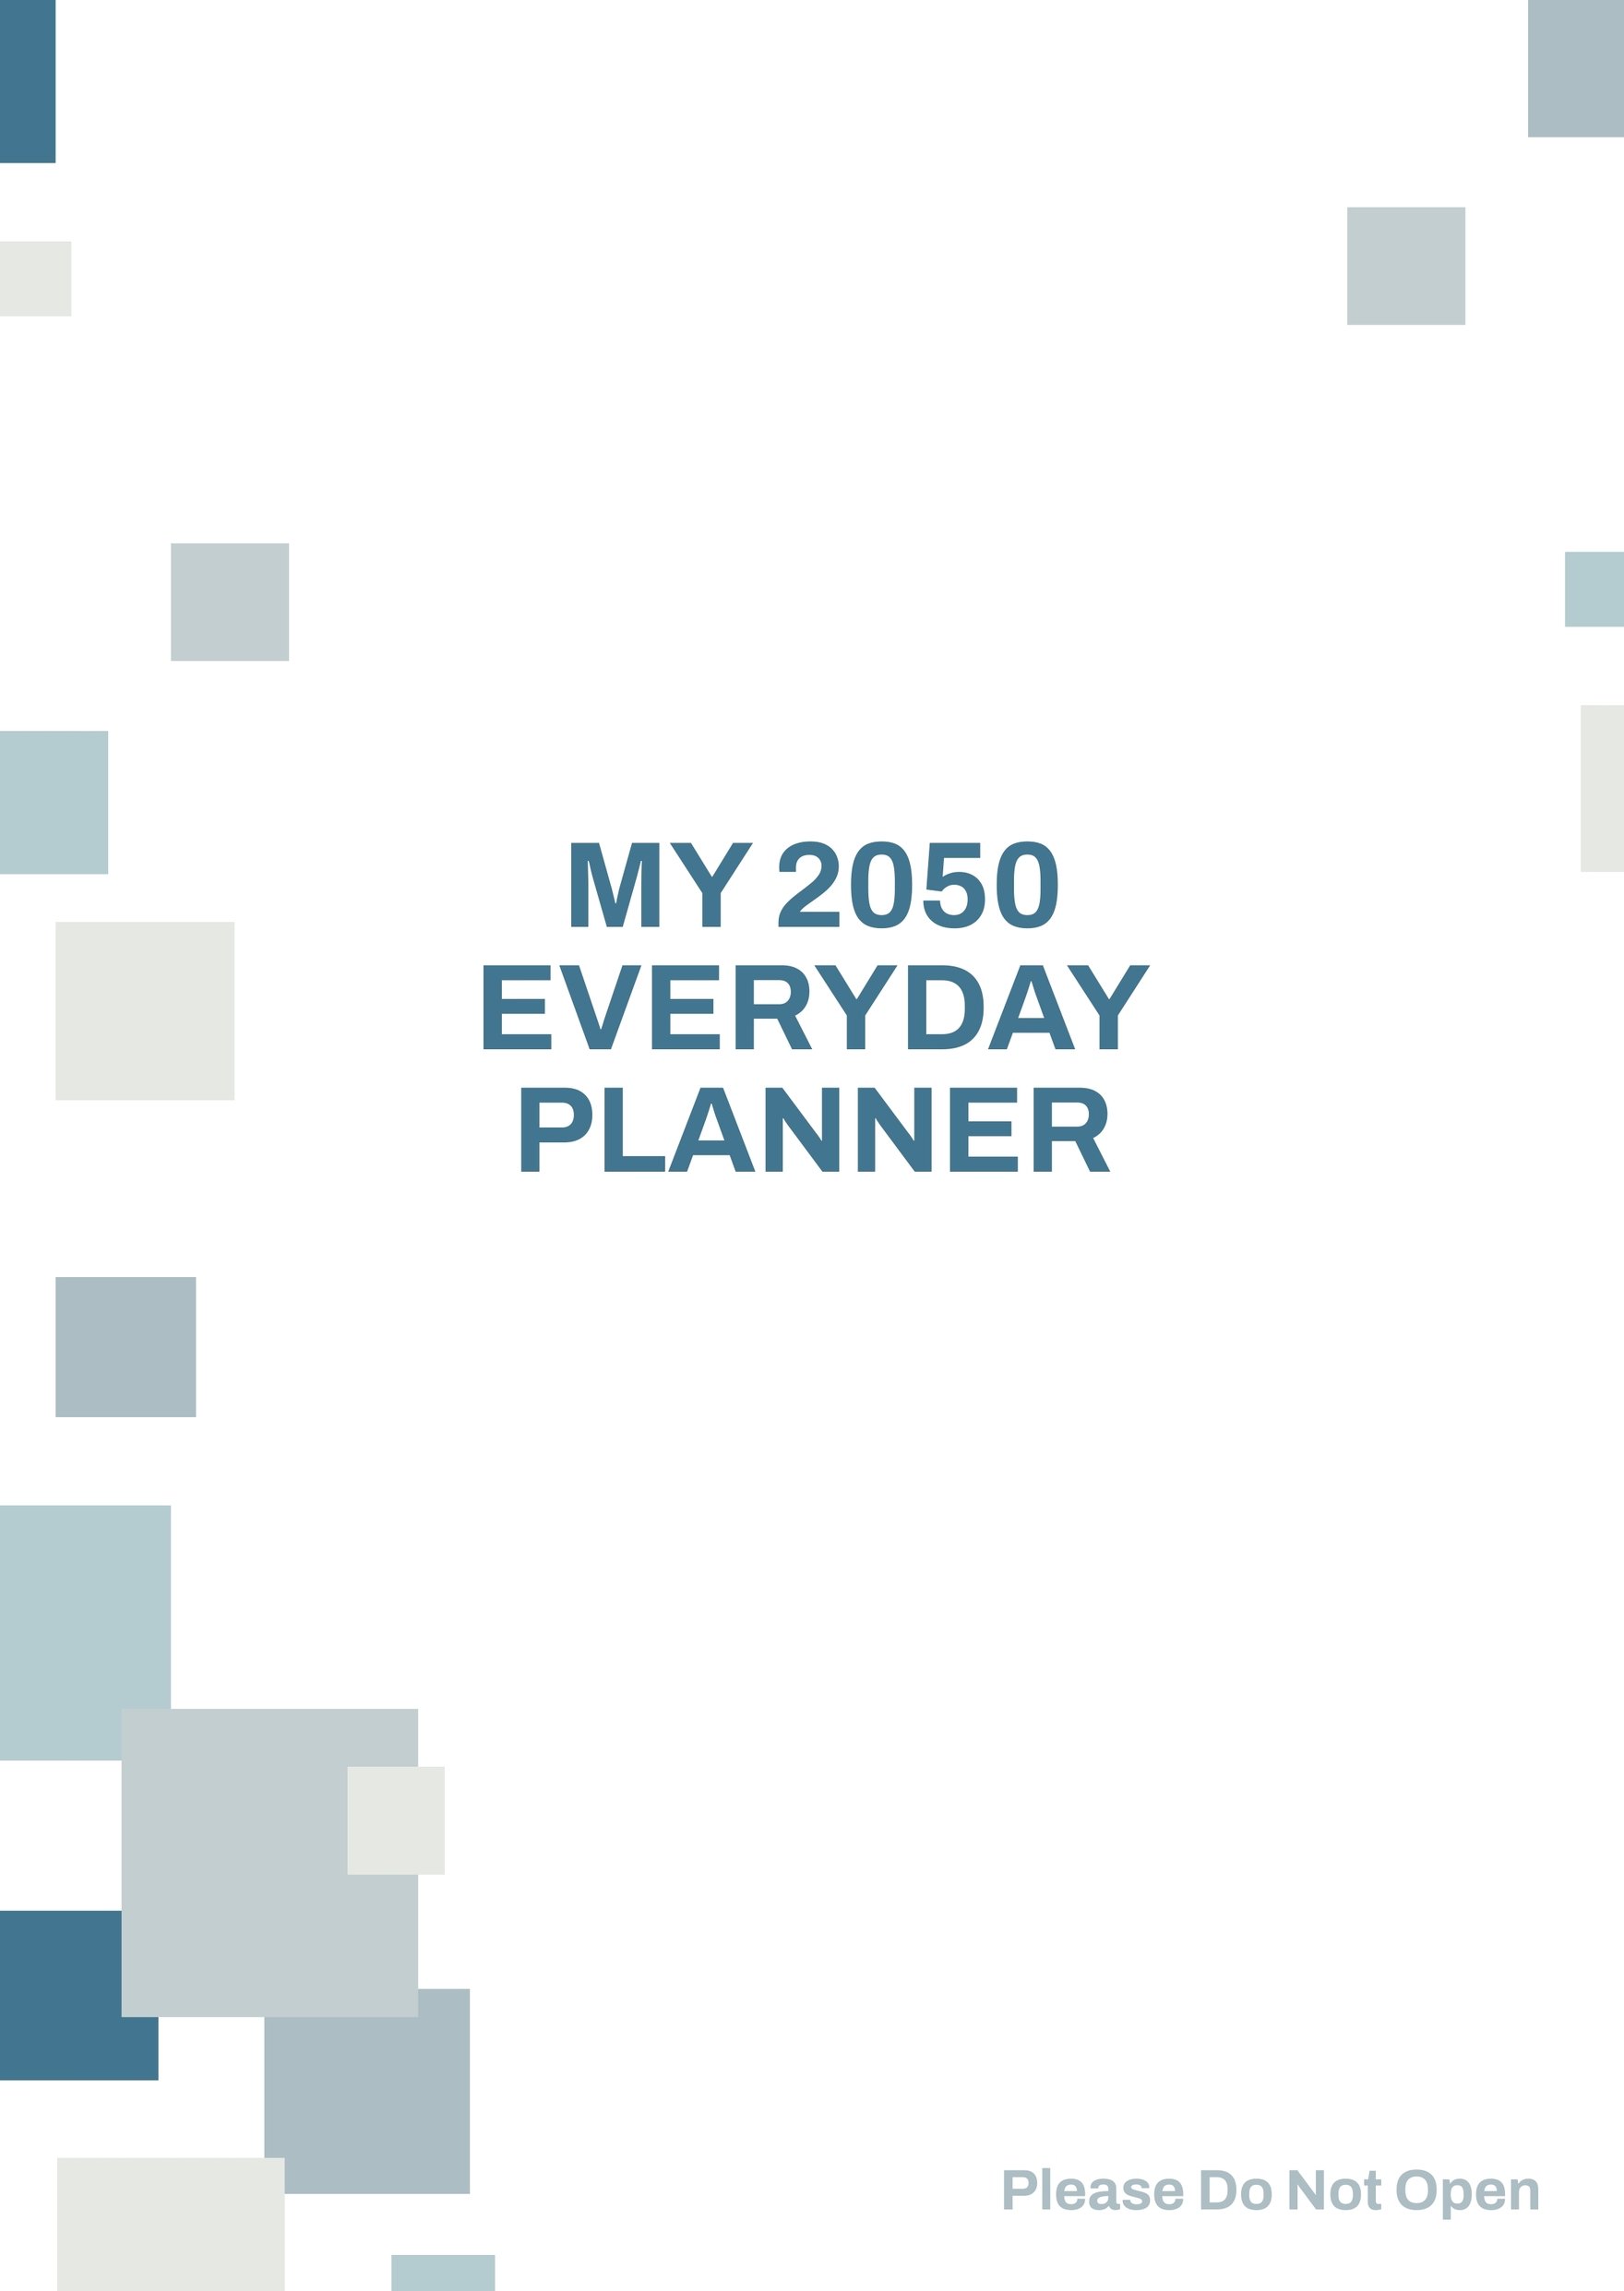 Personal Planner Cover Template